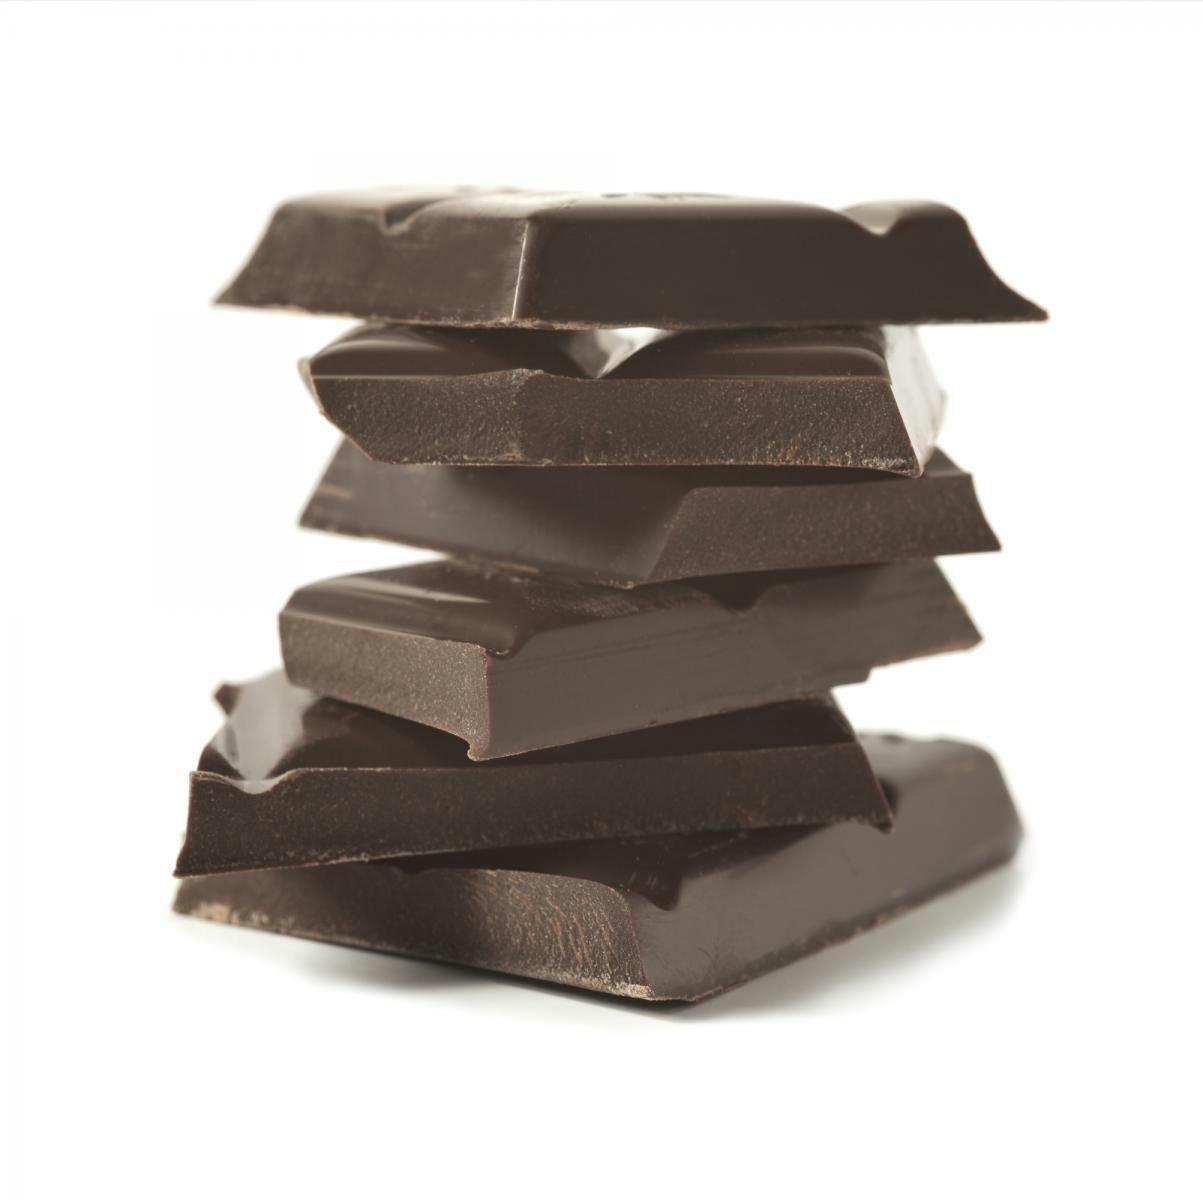 Study Supports Chocolate Antioxidants for Arterial Health